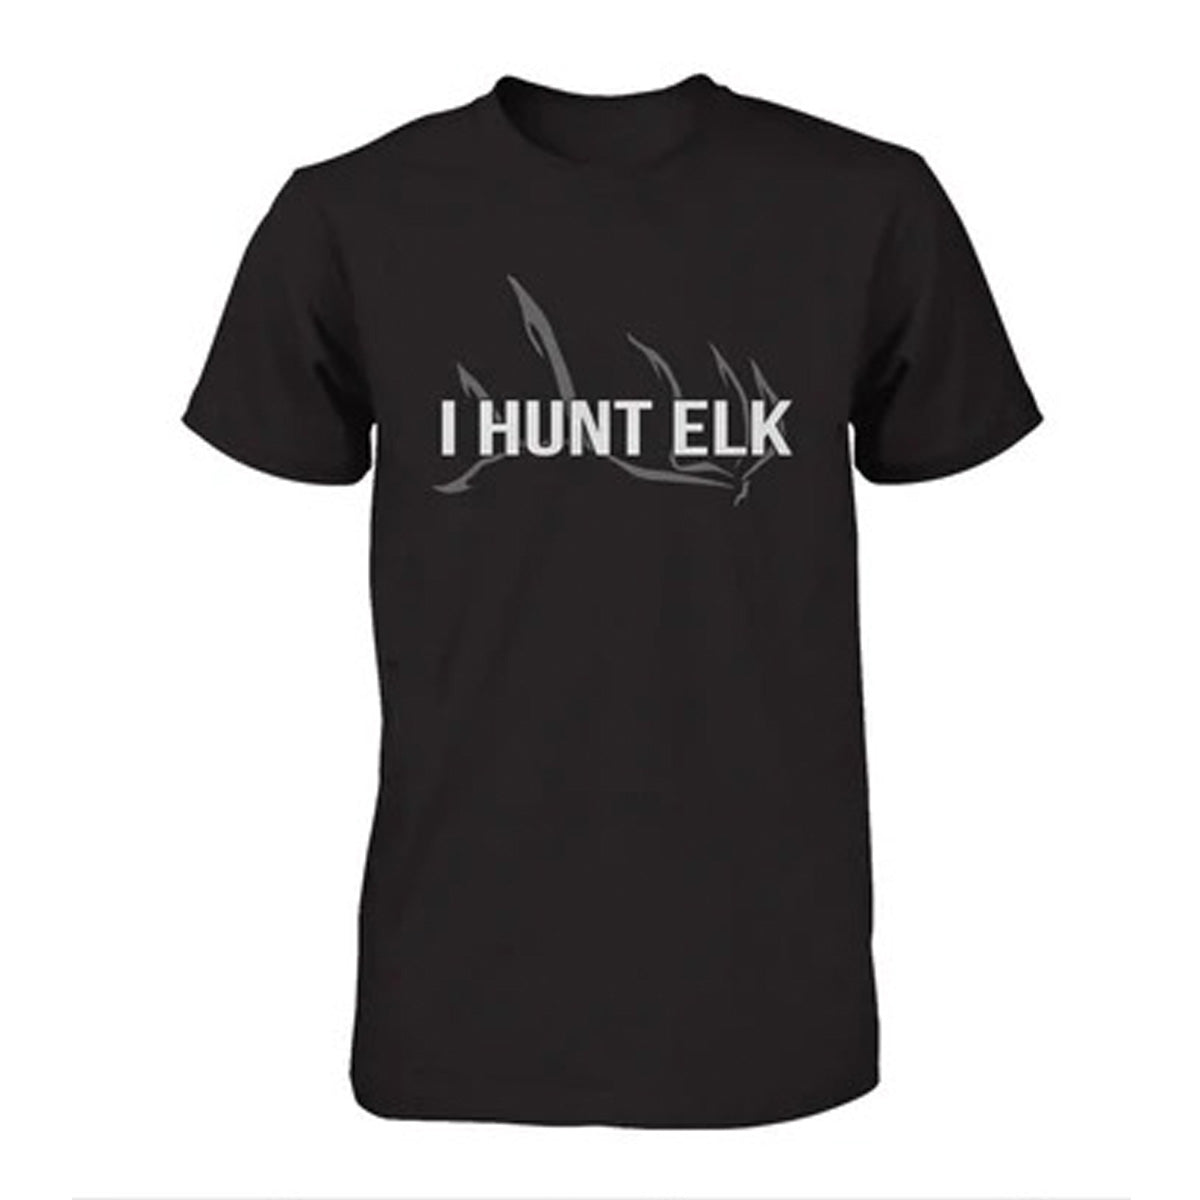 T-shirt featuring an I Hunt Elk print with a faint Grey Elk Antler outline  as a background